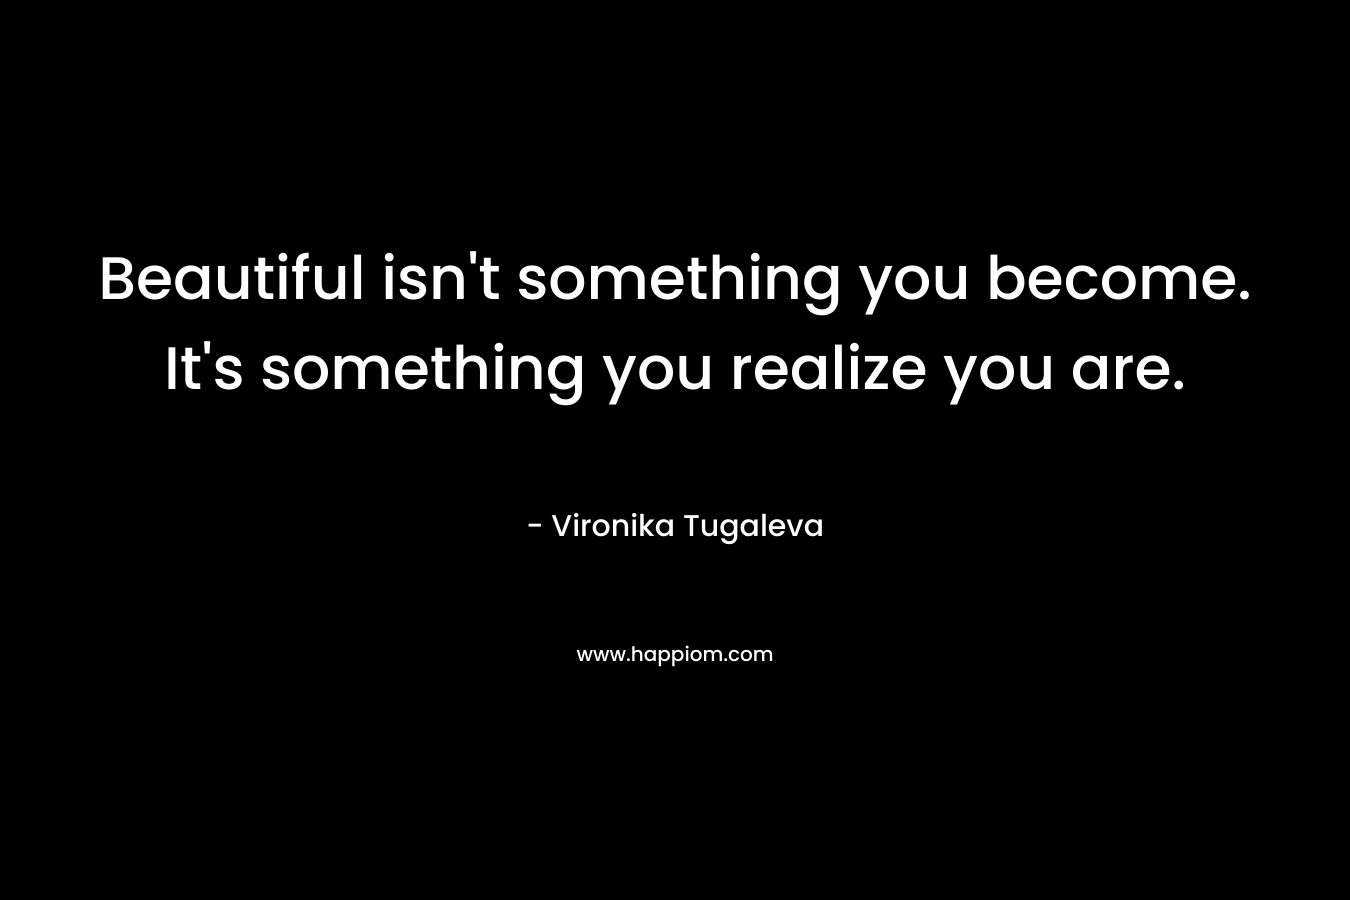 Beautiful isn't something you become. It's something you realize you are.